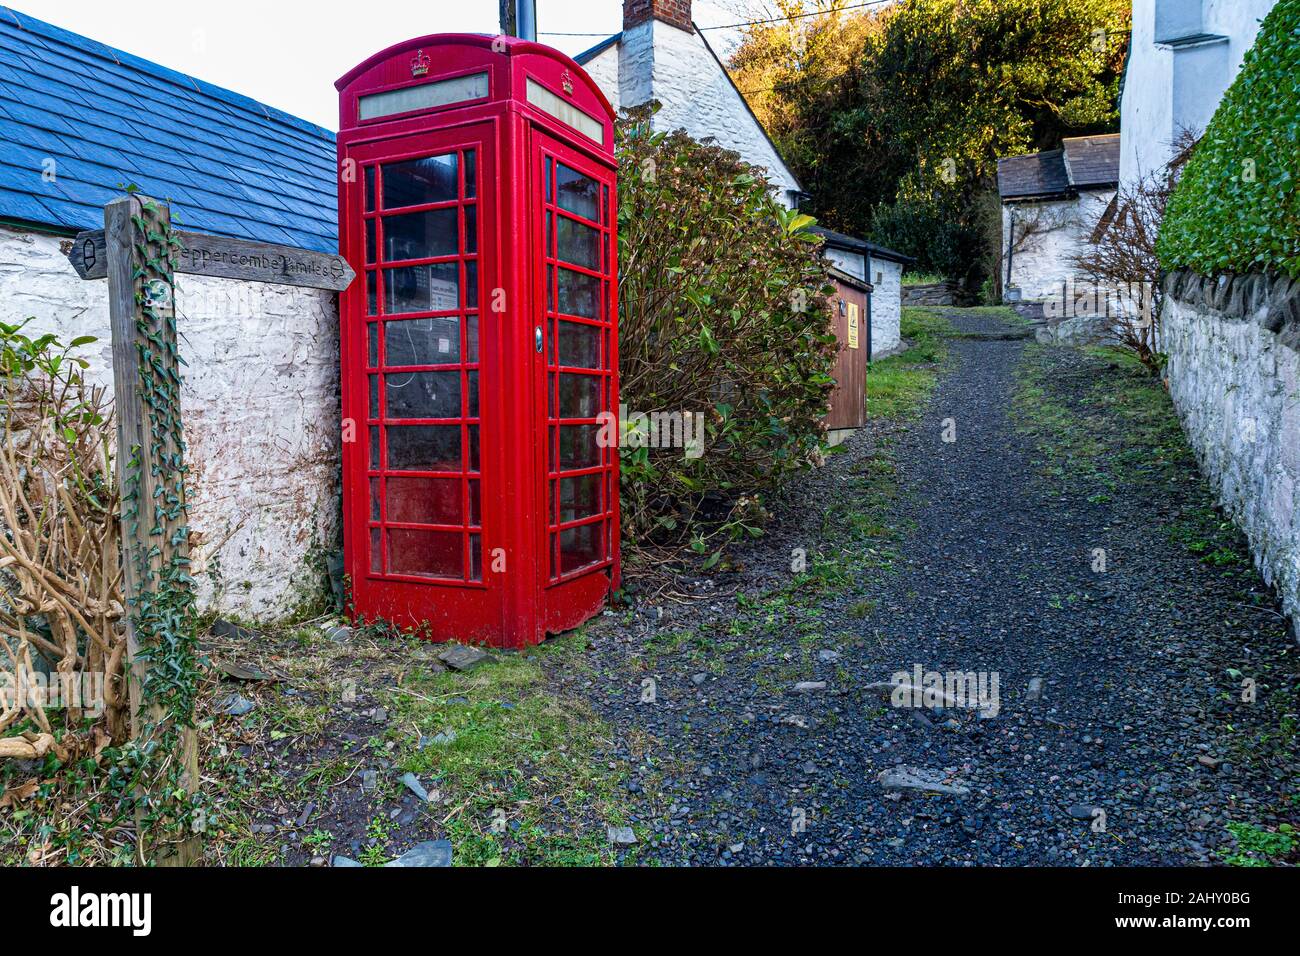 Bucks Mills, Phone Box and South West Coast Path Out of the Village With Signpost to Peppercombe 2 1/2 miles, Bucks Mills, Devon, Great Britain. Stock Photo